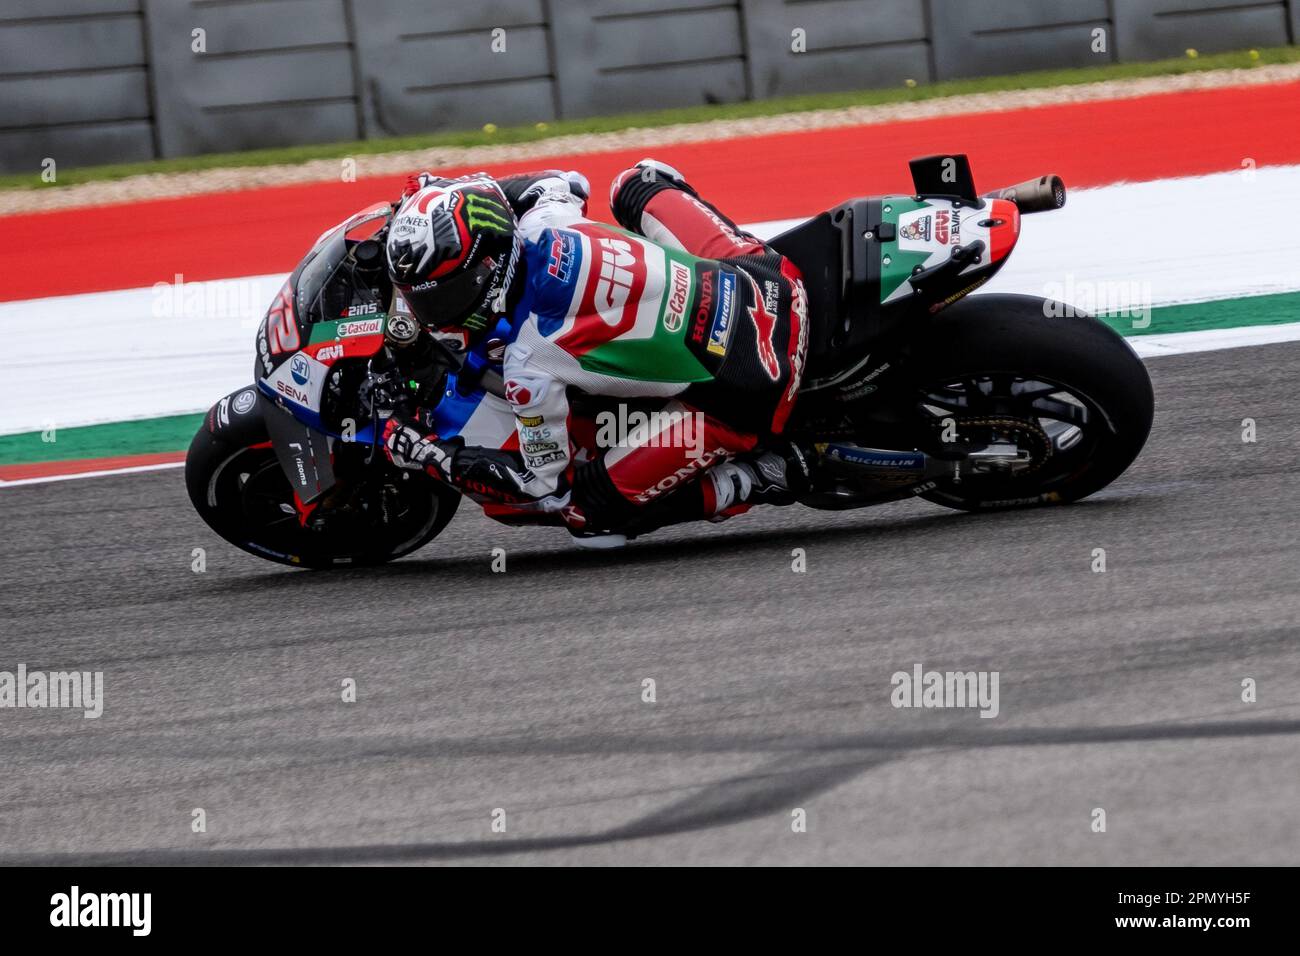 April 15, 2023.Alex Rins #42 with LCR Honda Castrol in action at MotoGP during the 15 minute qualifying at the Red Bull Grand Prix at Circuit of the Americas in Austin Texas